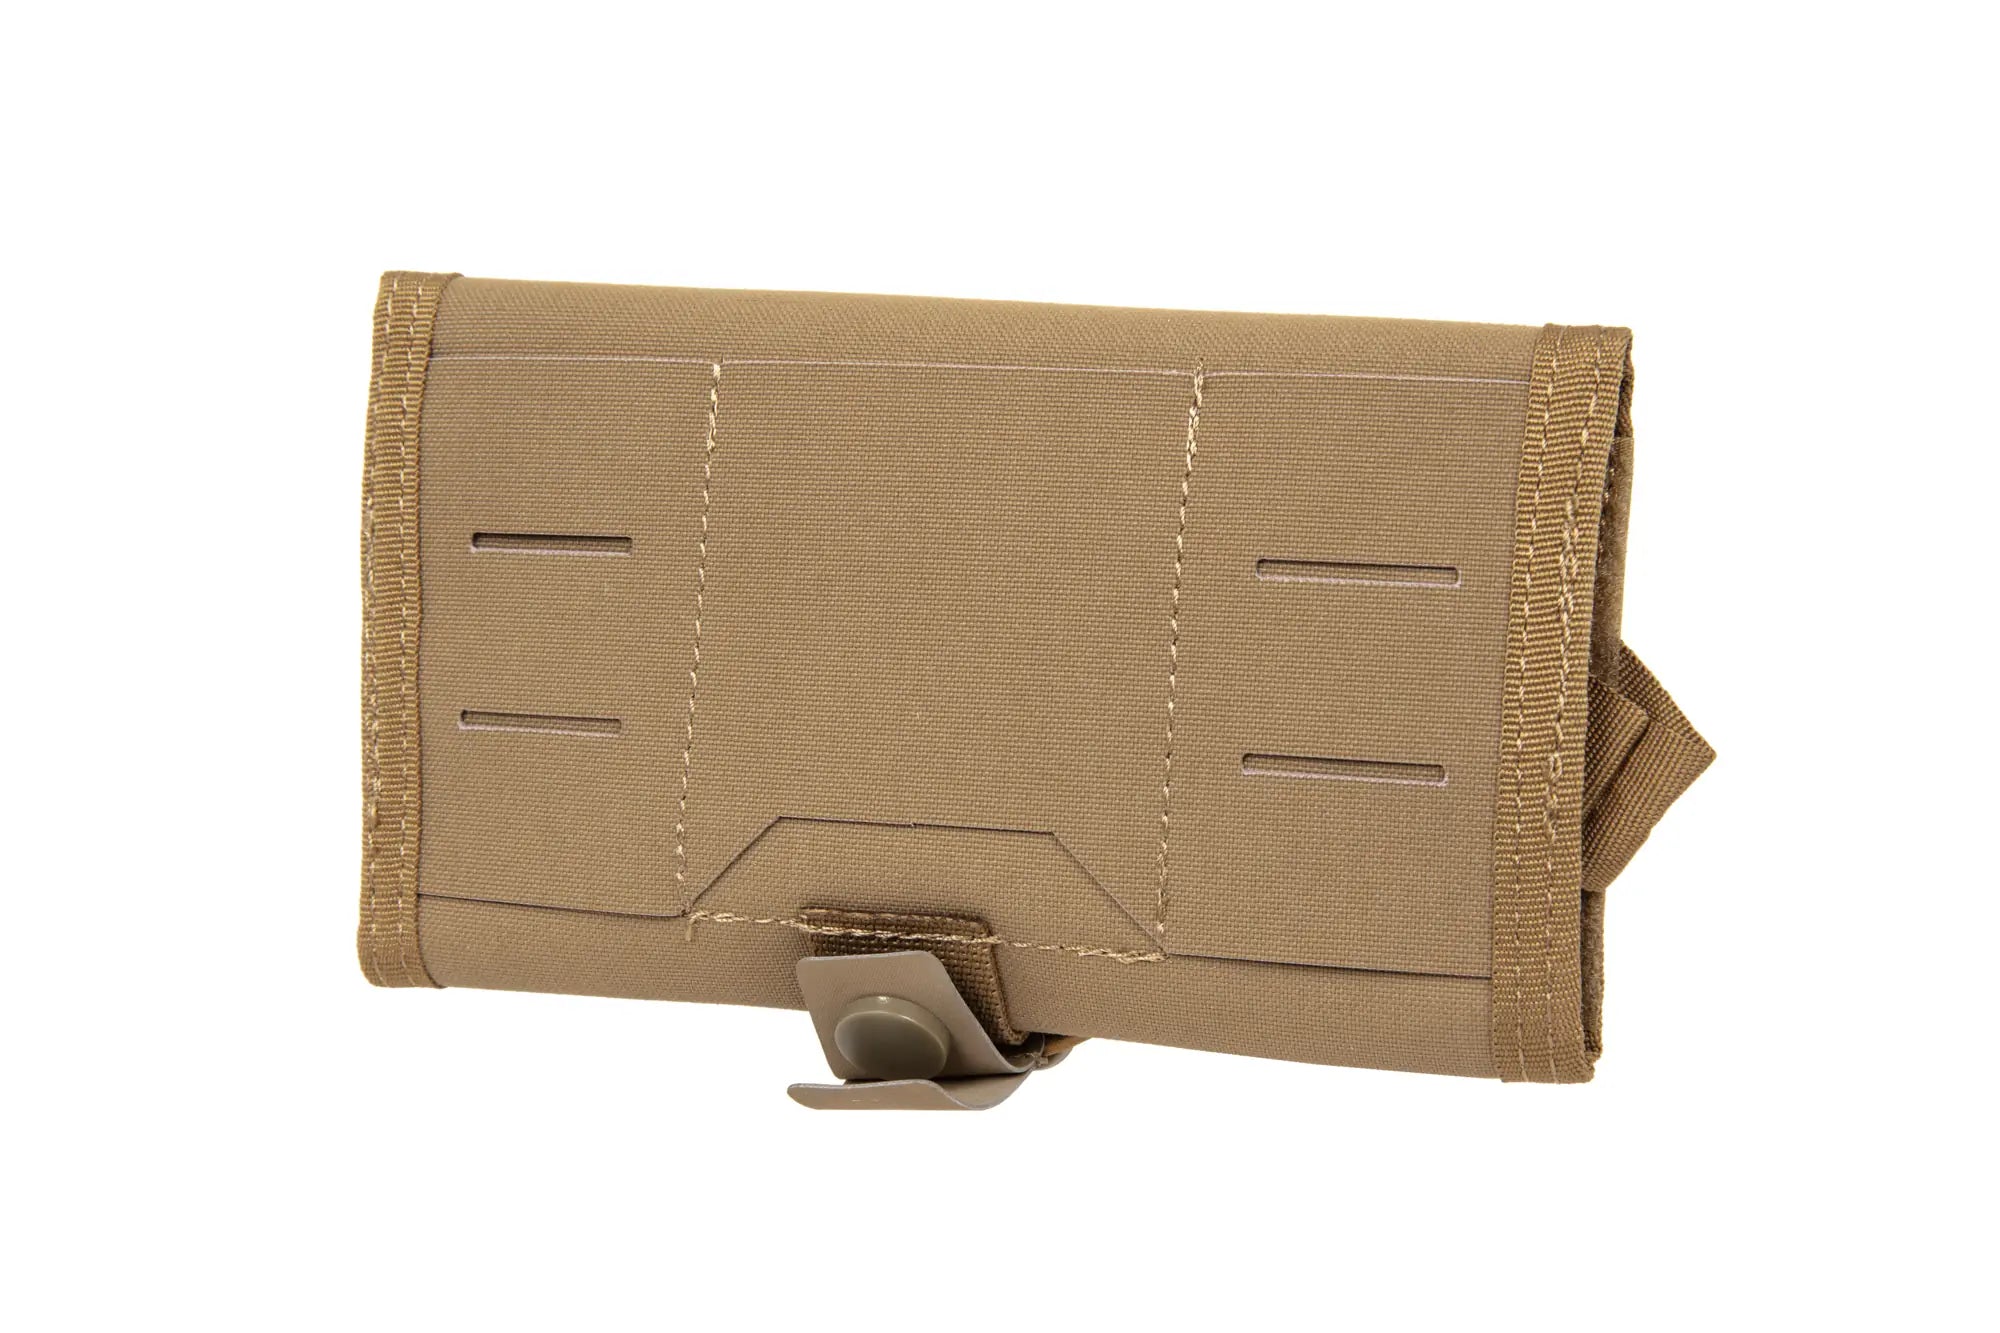 Tactical phone/gps pocket Wosport Coyote Brown